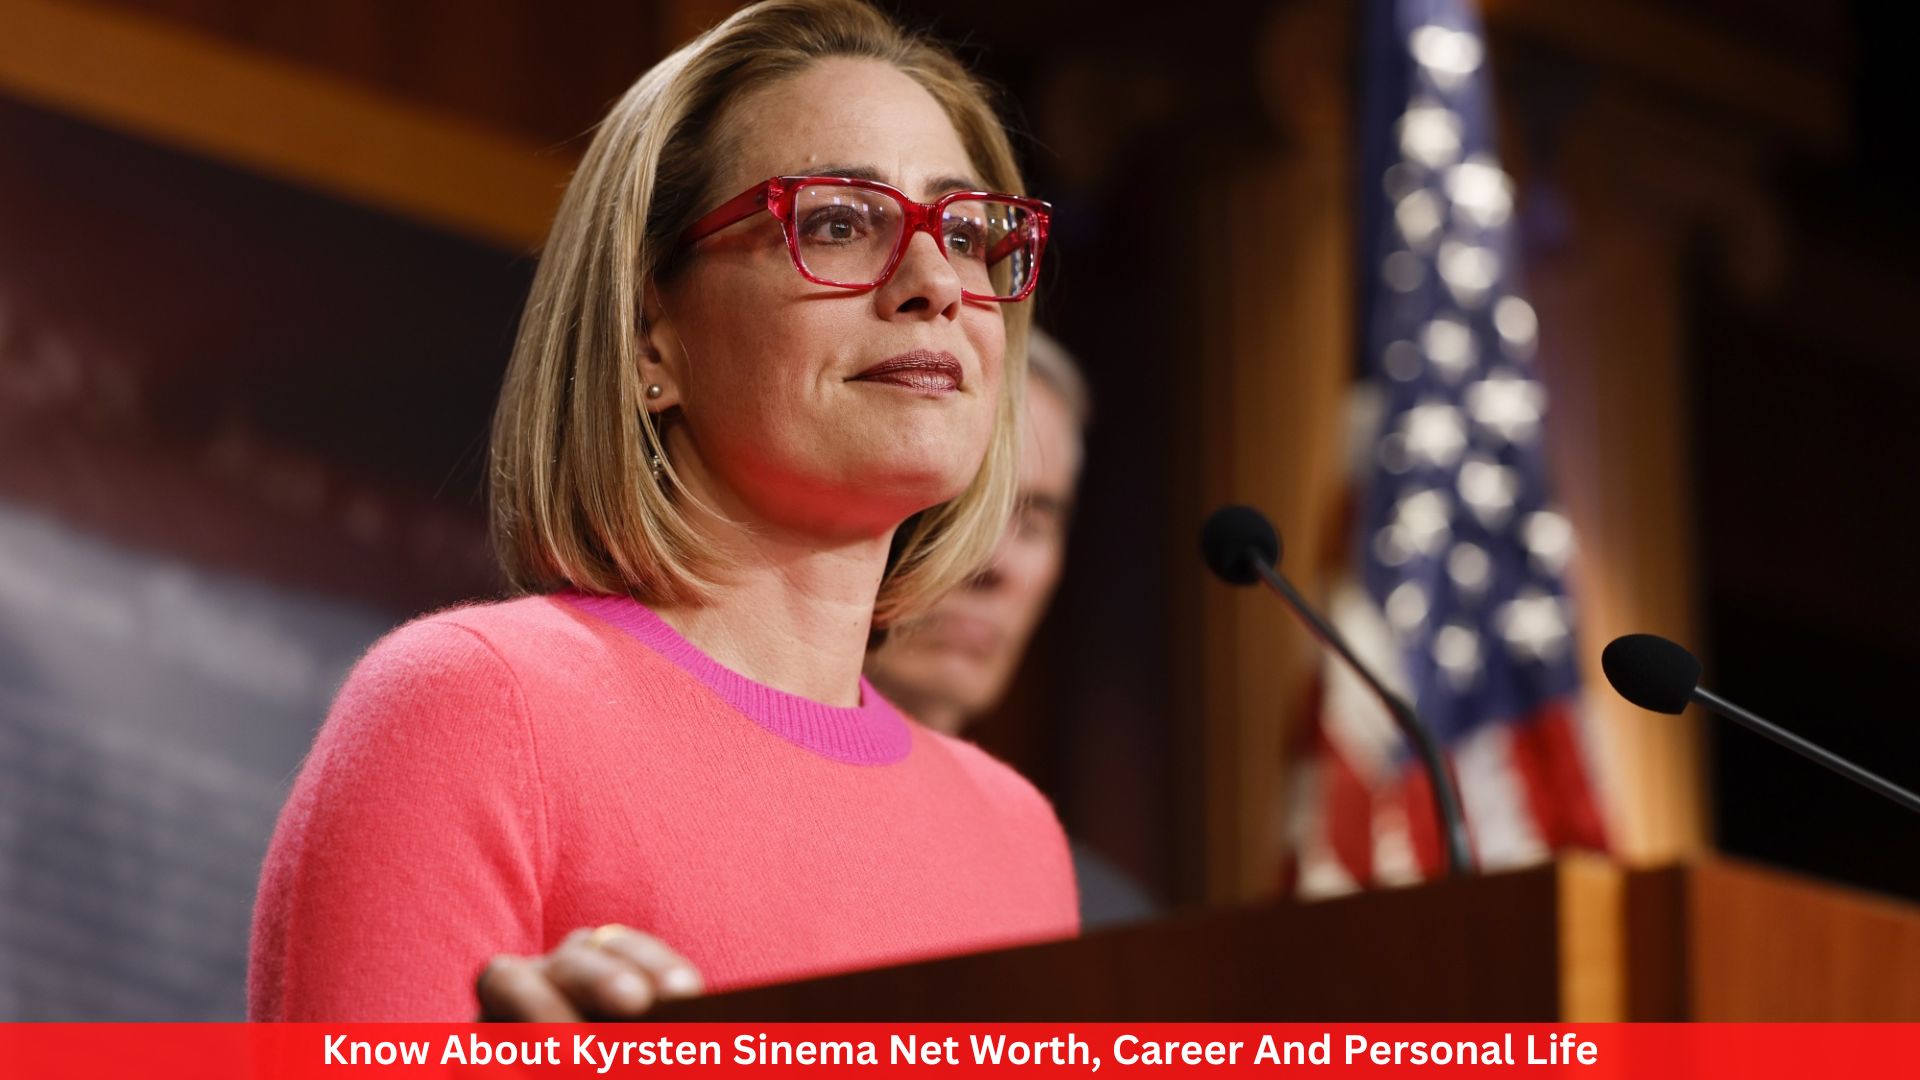 Know About Kyrsten Sinema Net Worth, Career, And Personal Life